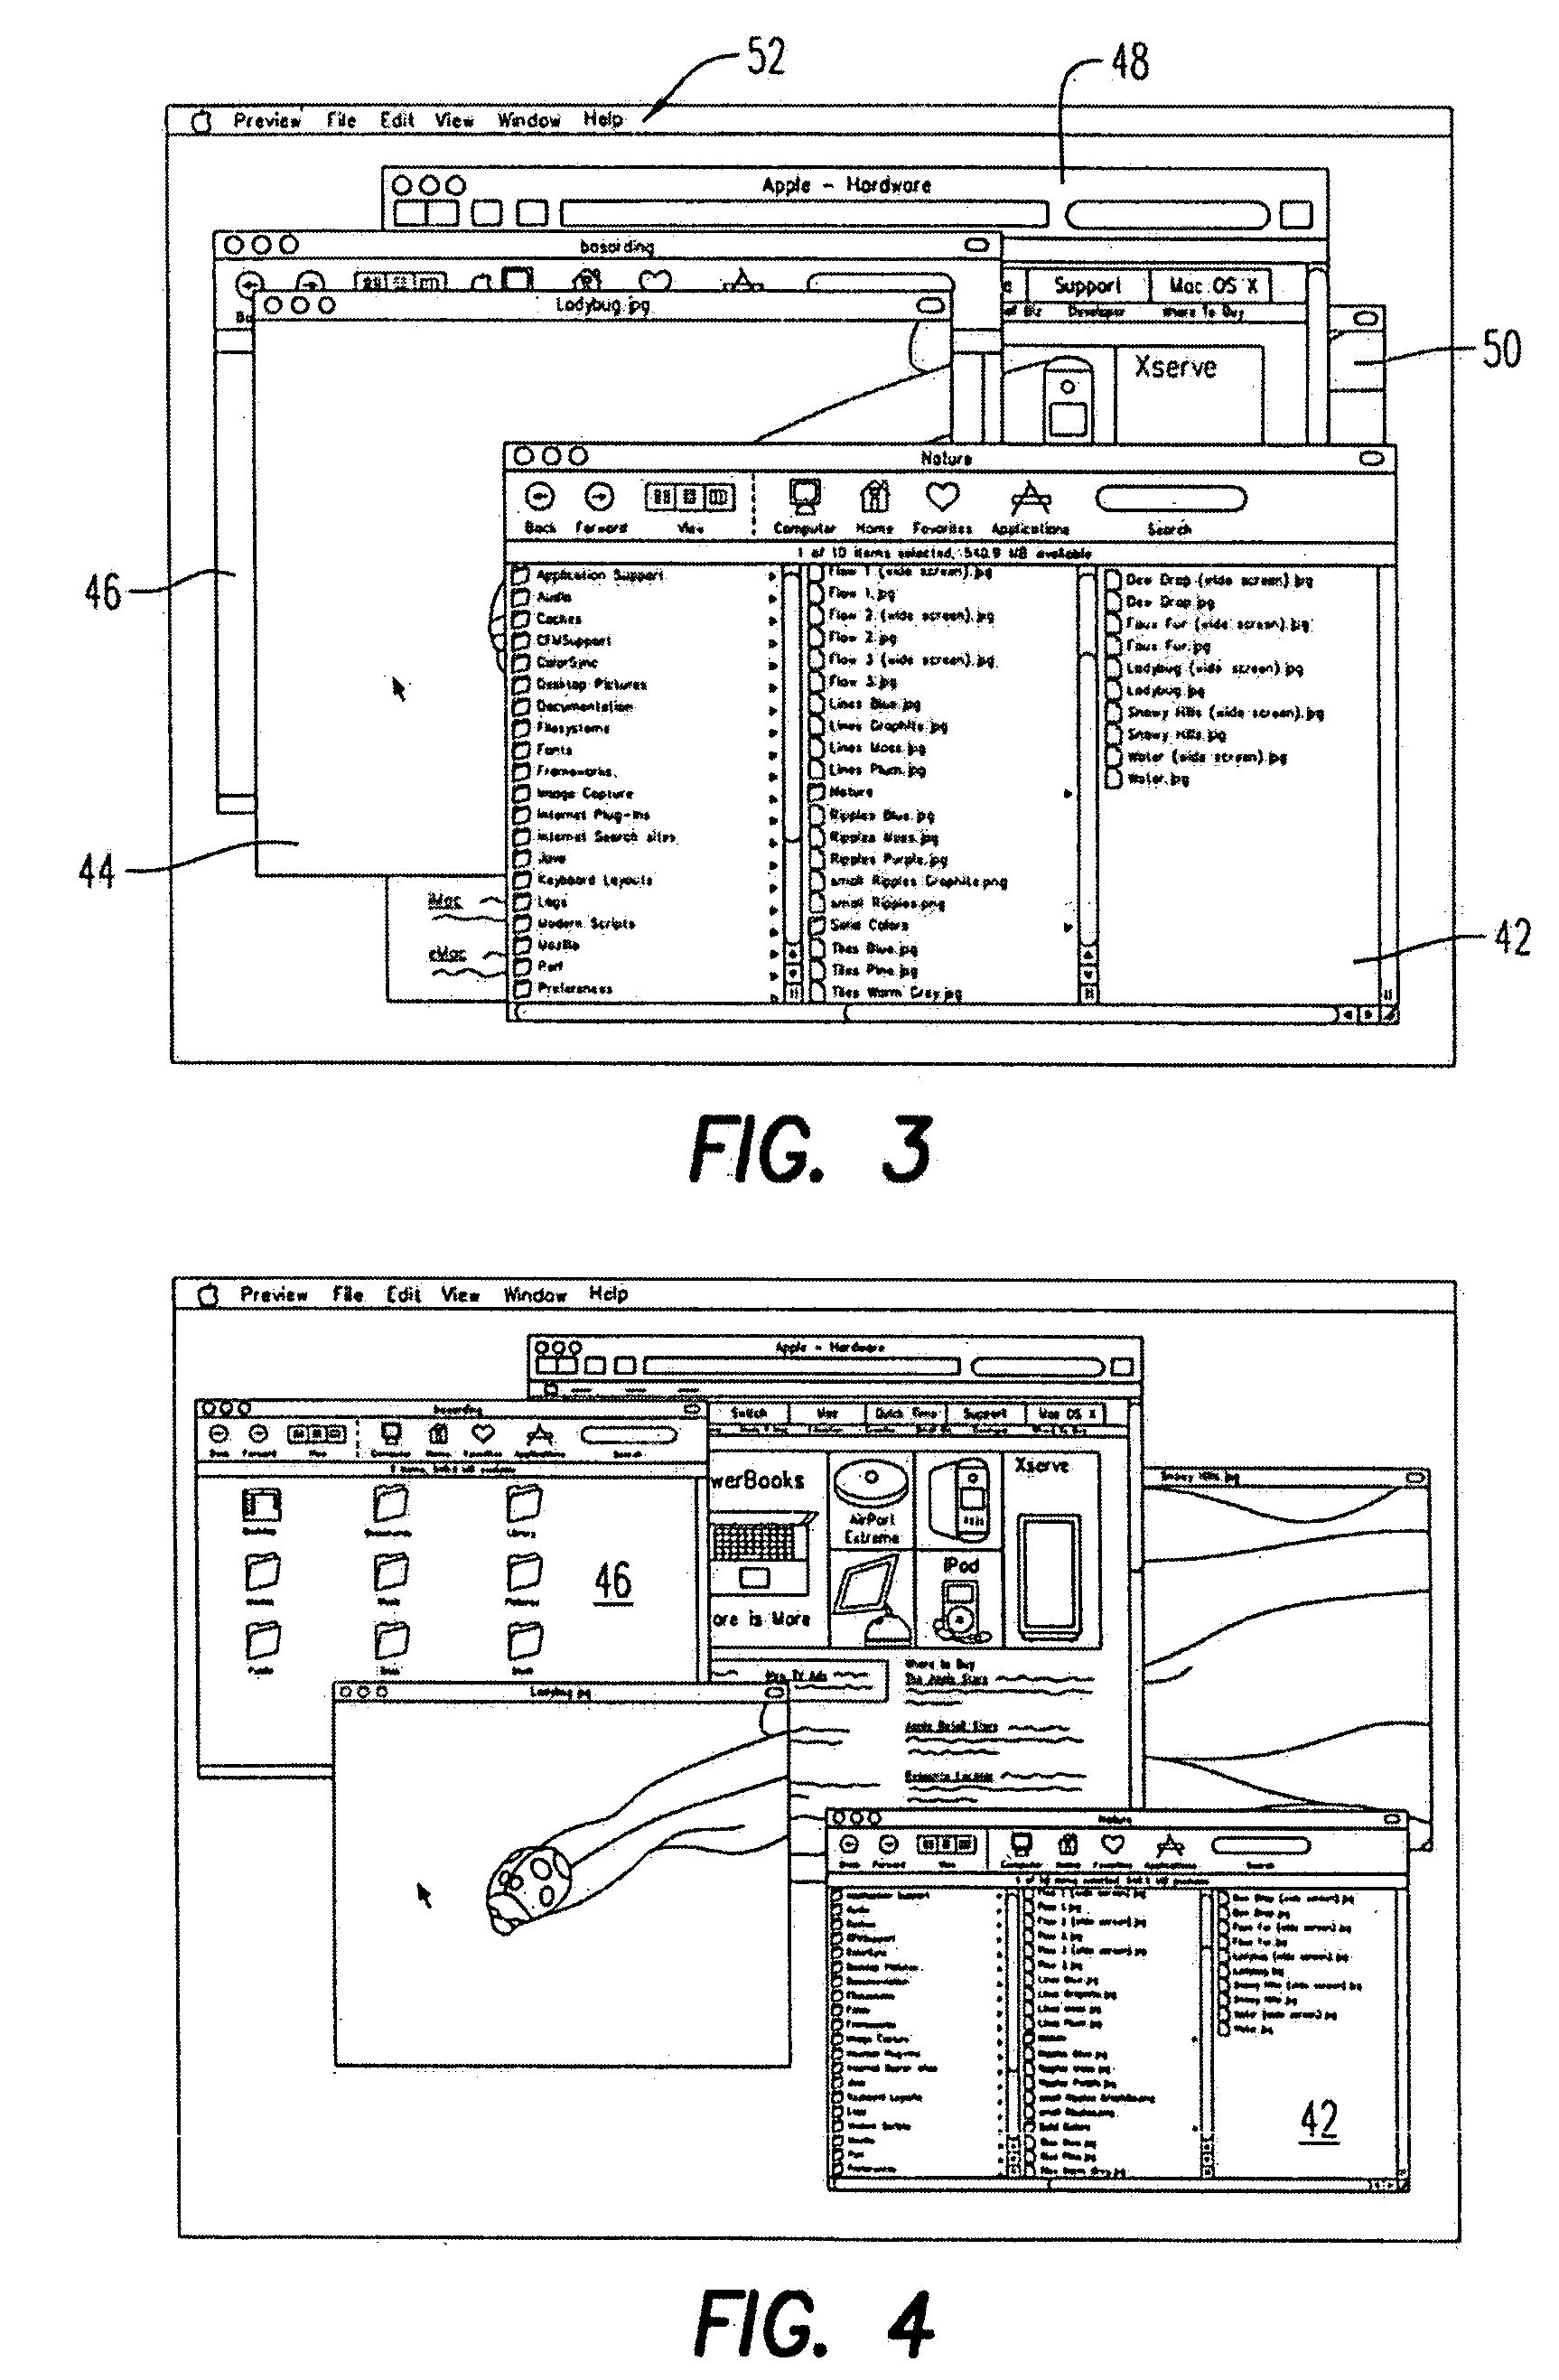 Computer Interface Having A Virtual Single-Layer Mode For Viewing Overlapping Objects